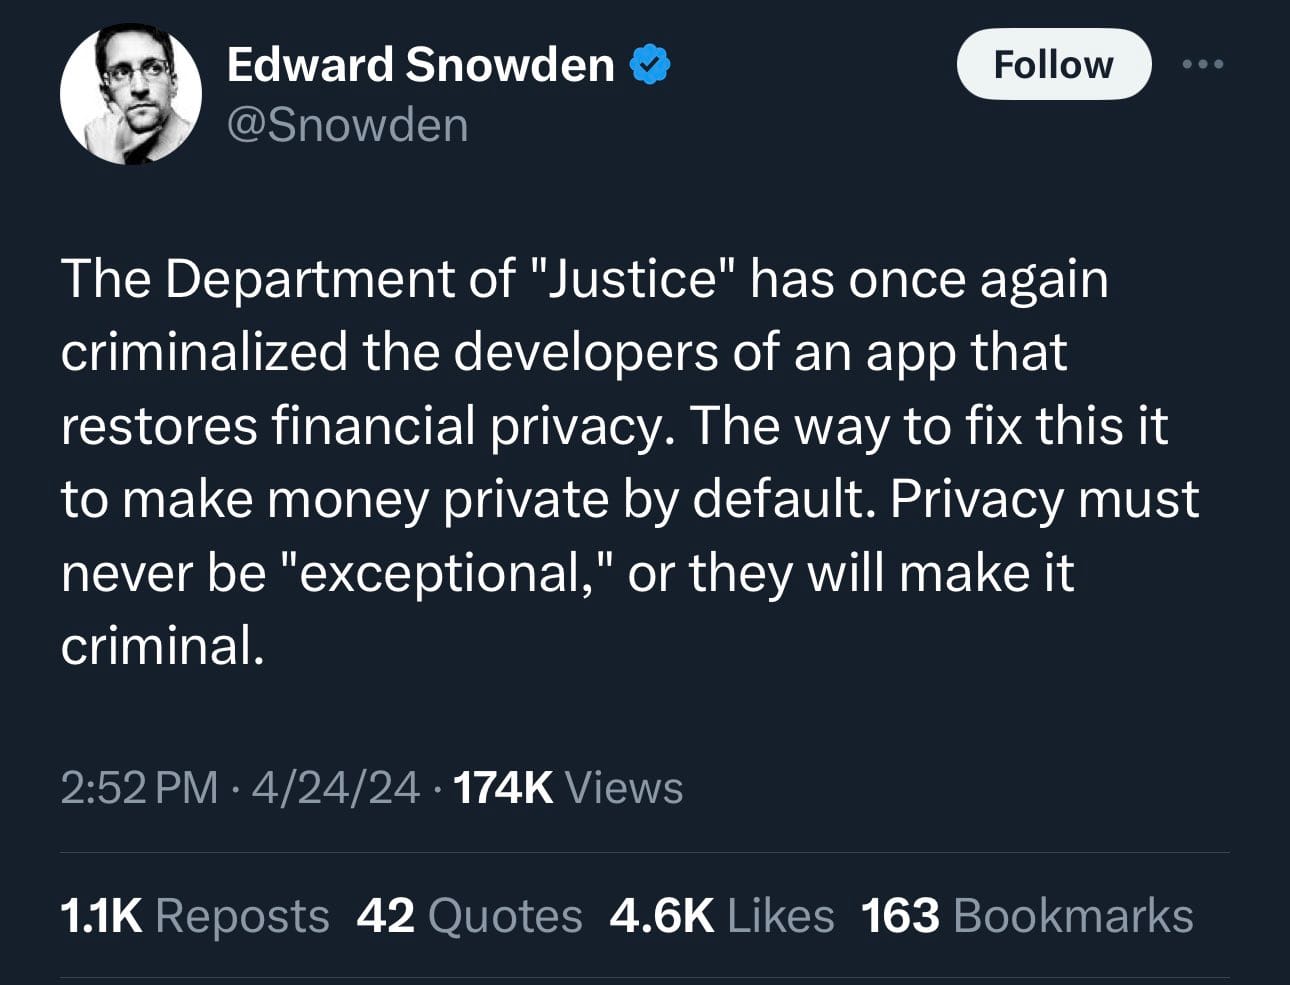 Privacy is not a crime